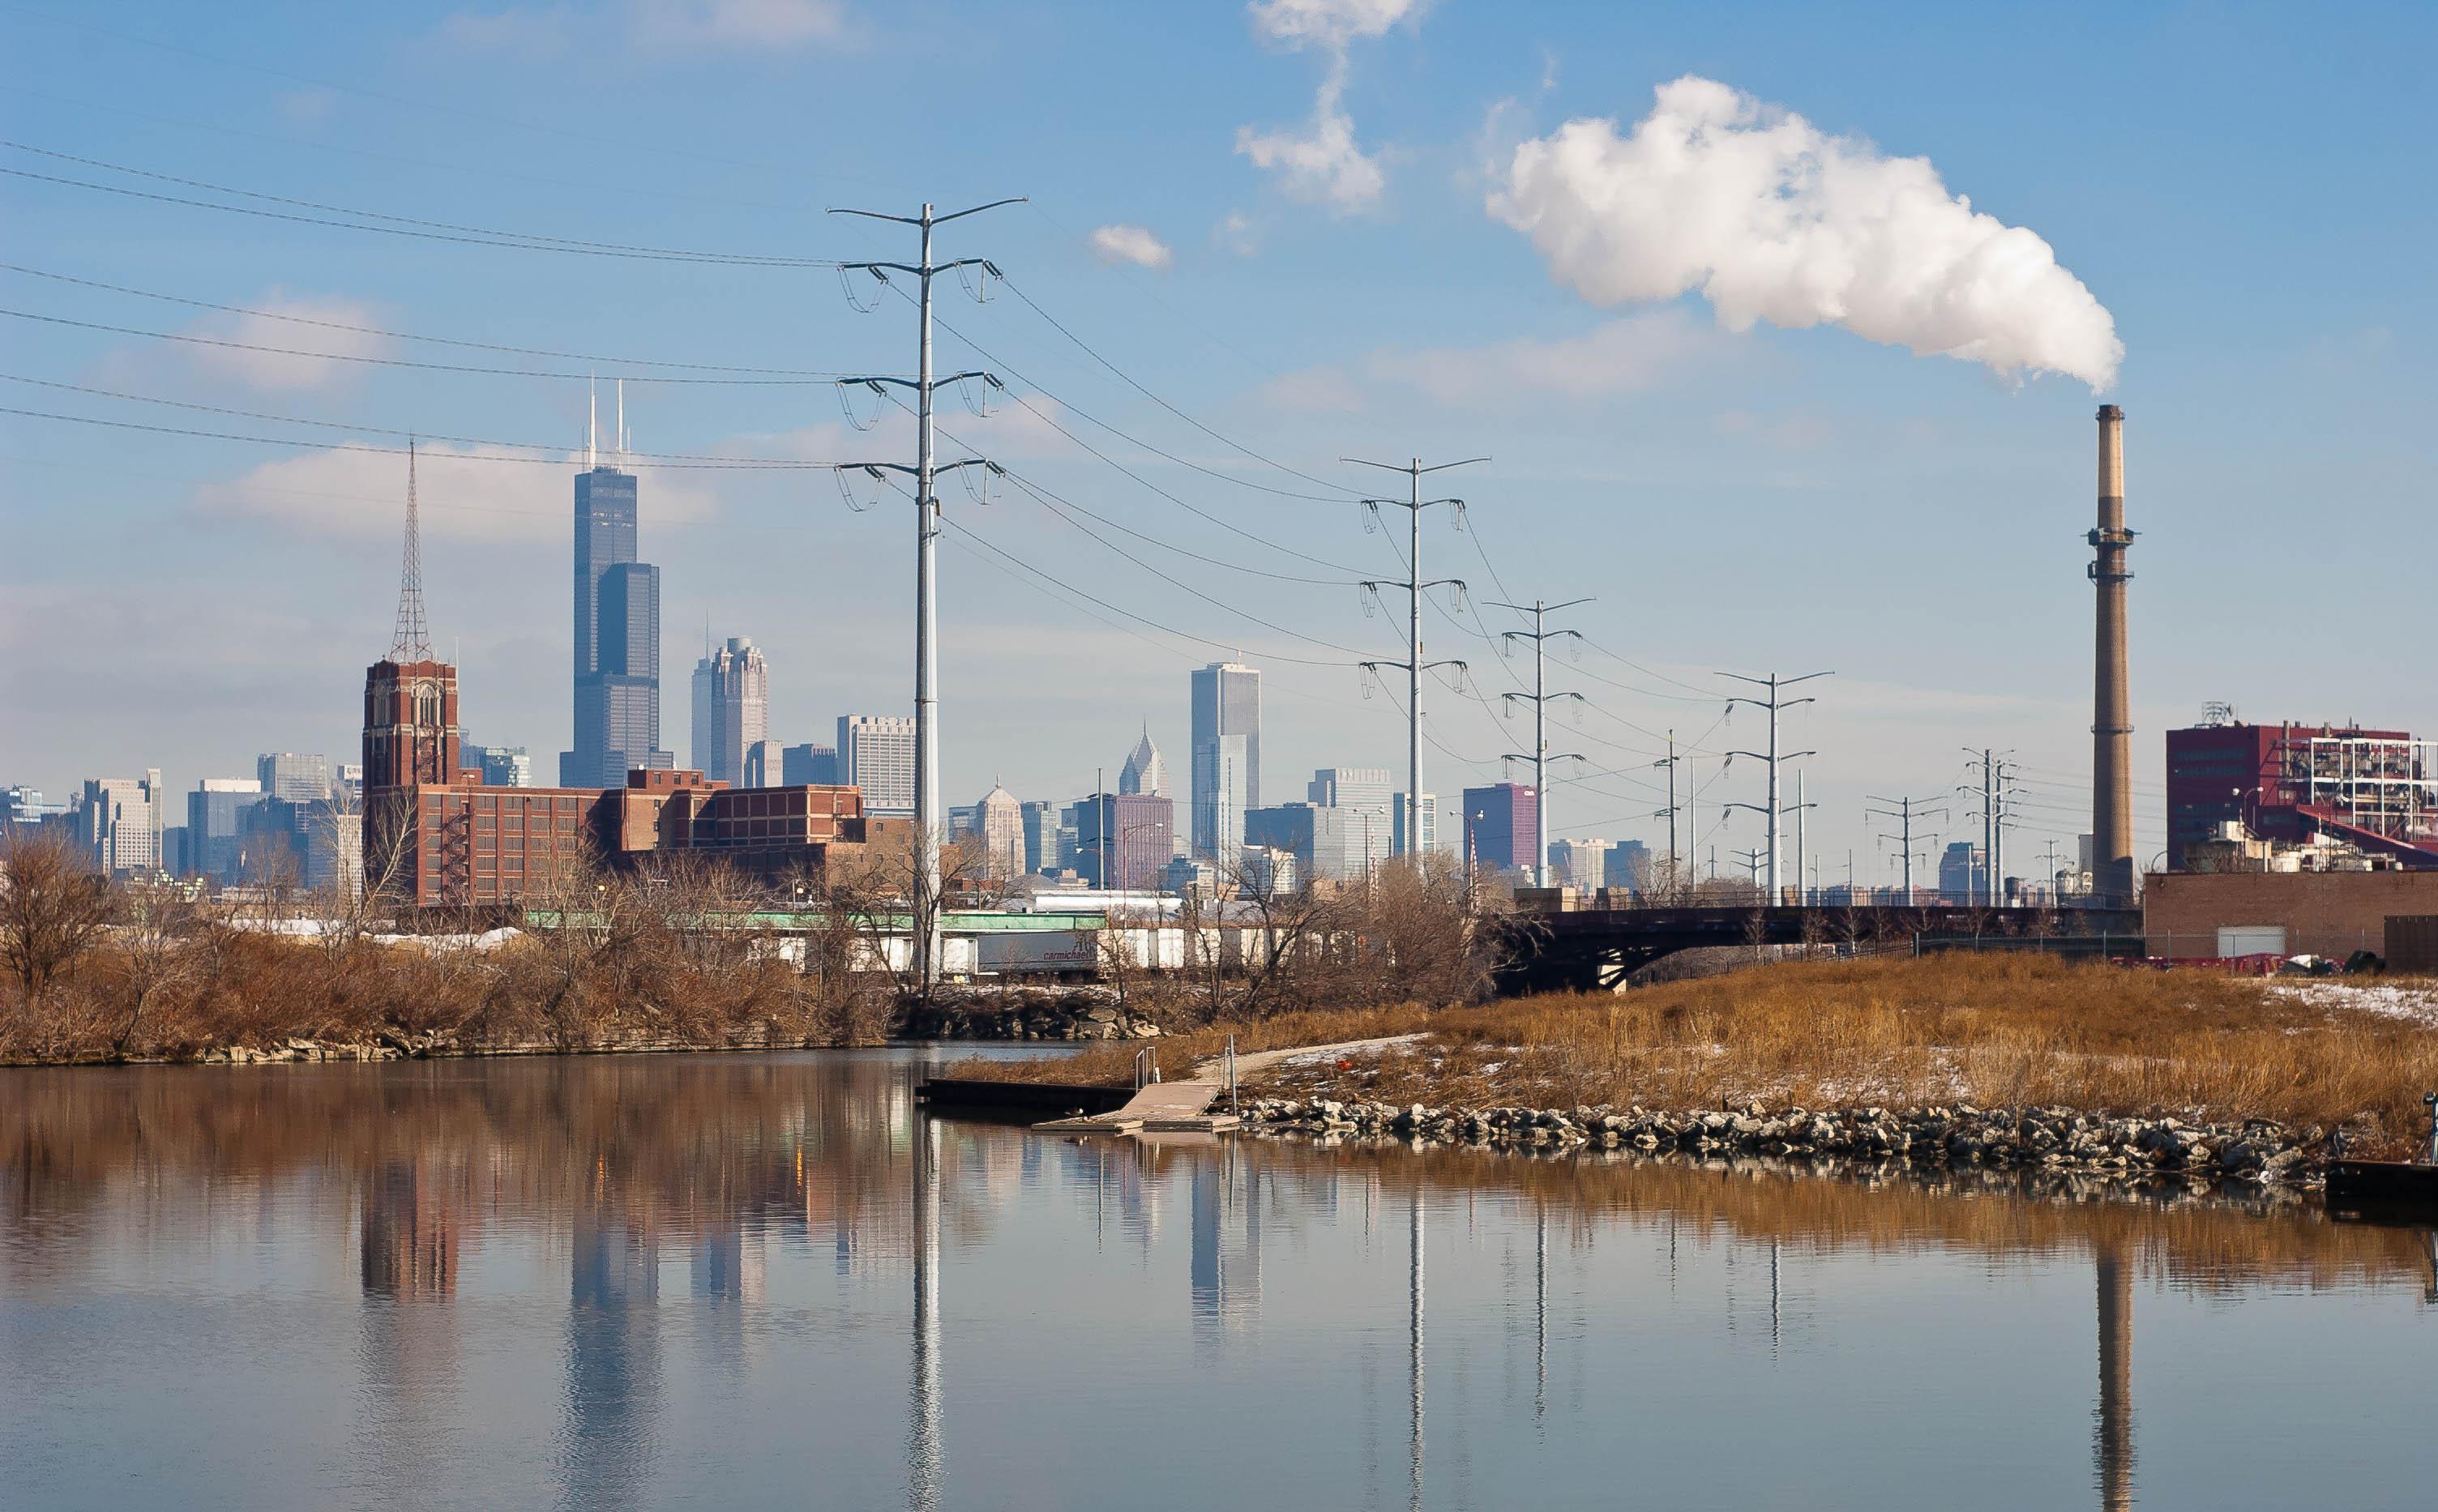 Experts say proposed cuts to the EPA would affect Chicago communities already impacted by pollution and other environmental threats. (Jeremy Atherton / Wikimedia Commons)